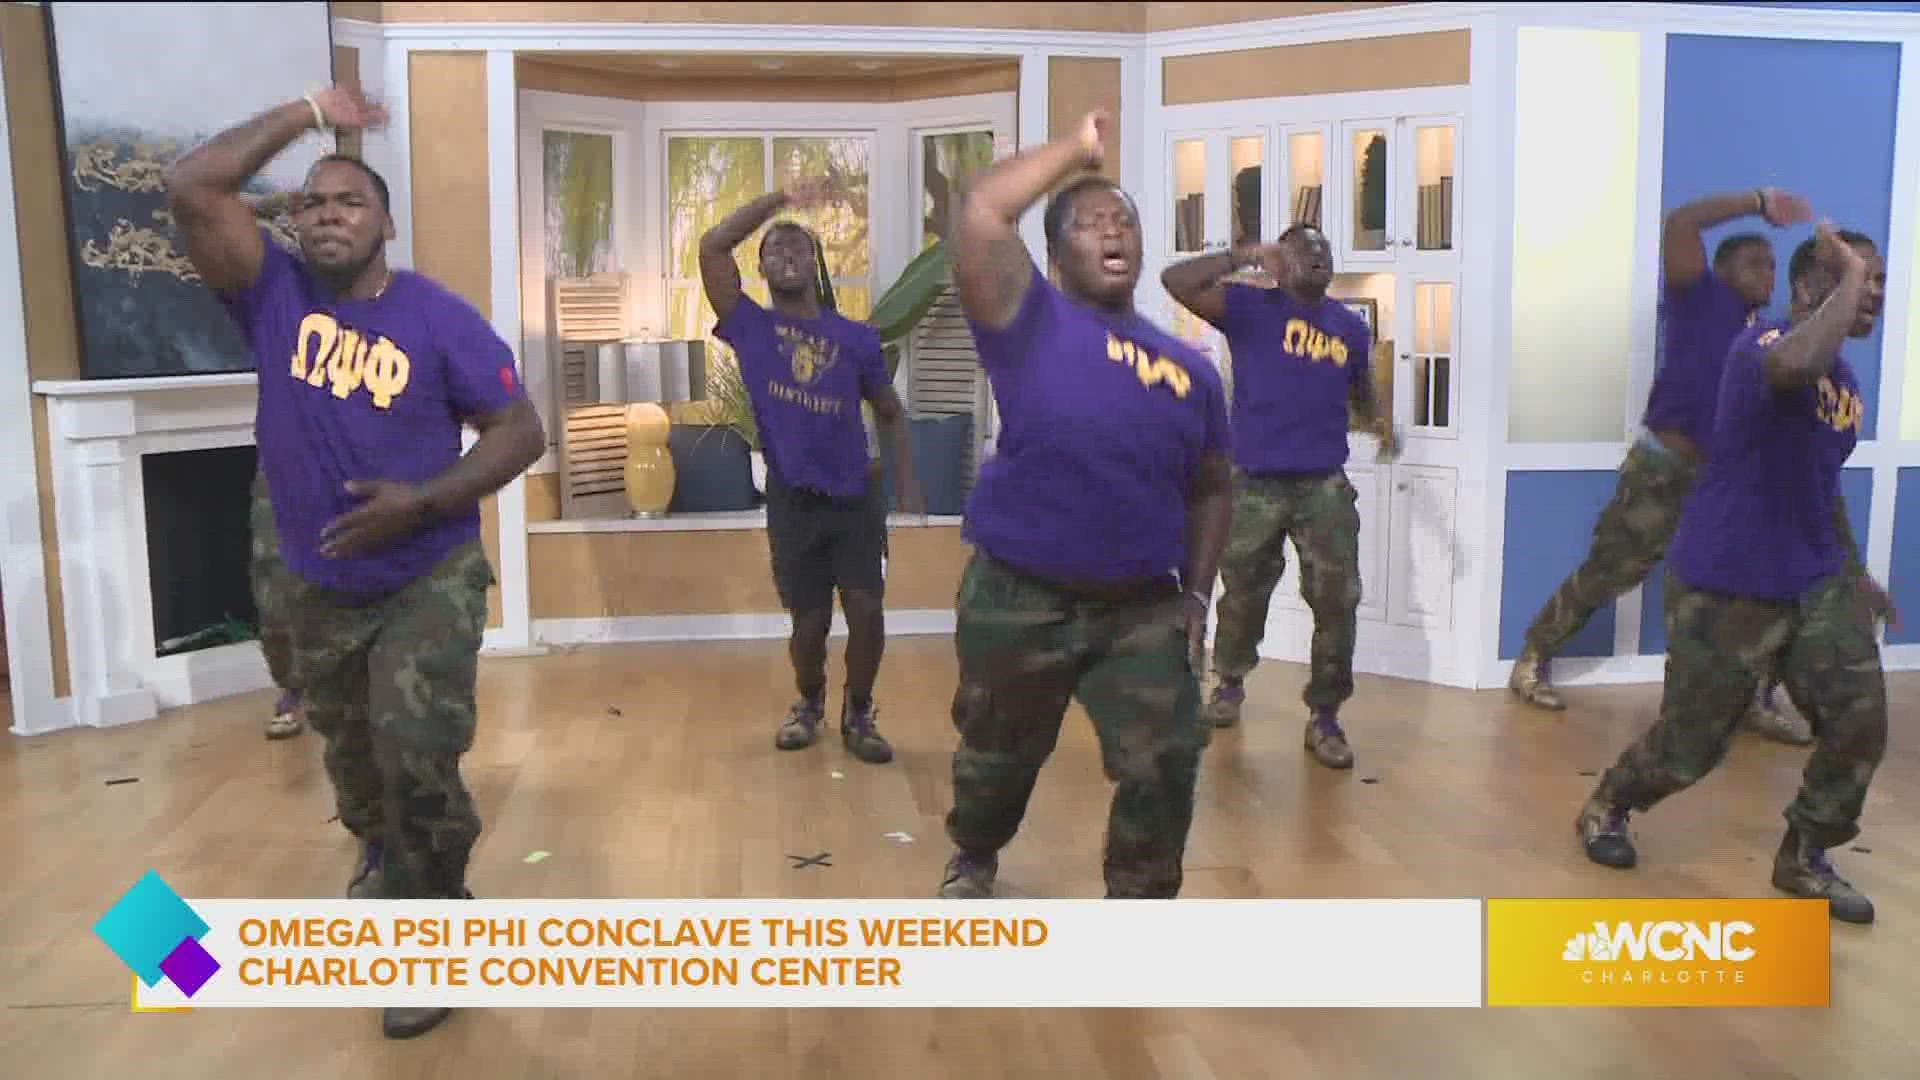 Omega Psi Phi Fraternity, Inc. Conclave